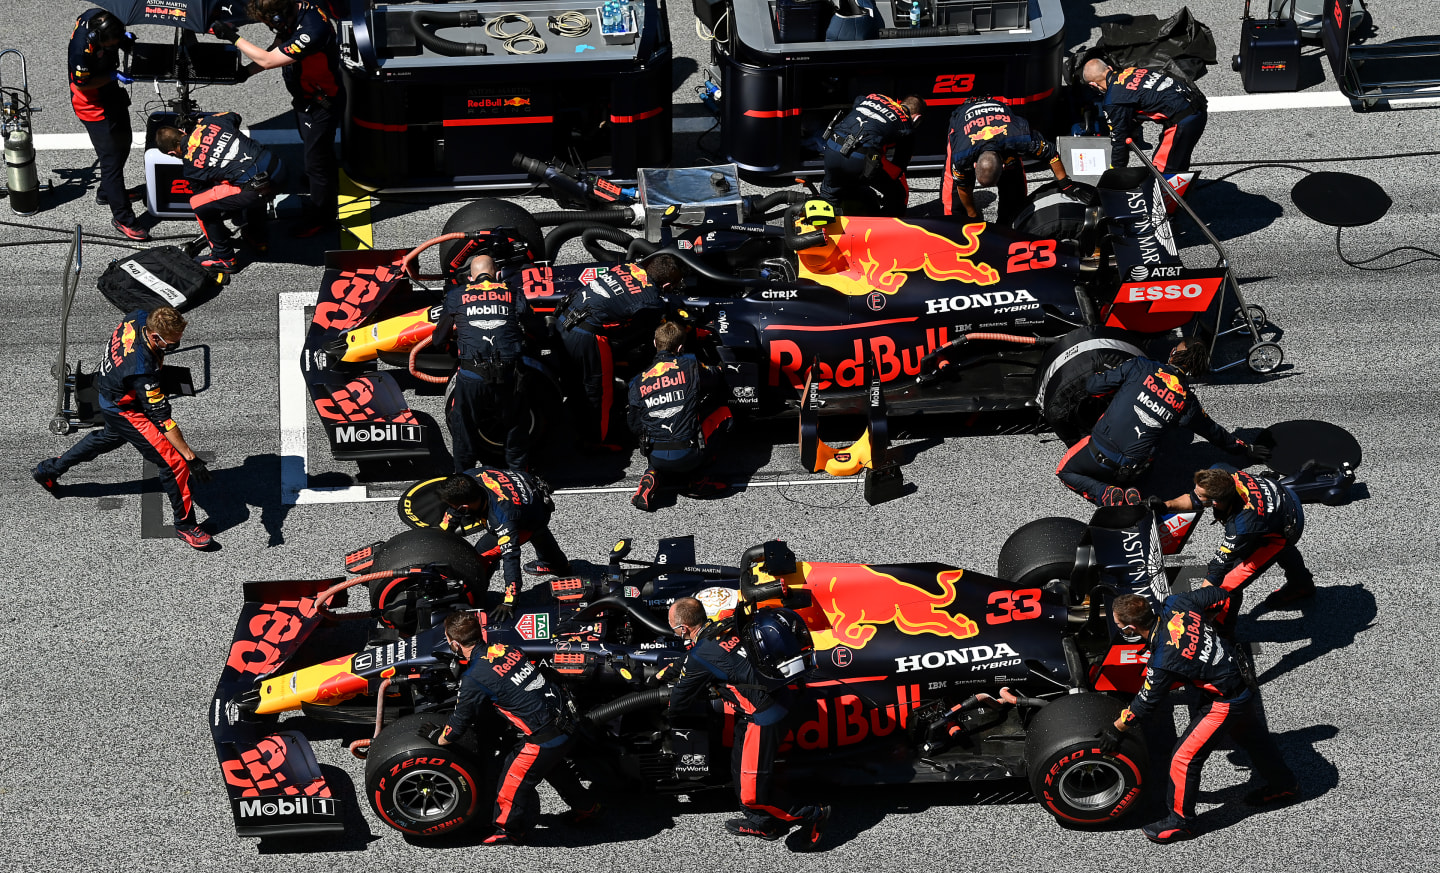 SPIELBERG, AUSTRIA - JULY 05: Alexander Albon of Thailand driving the (23) Aston Martin Red Bull Racing RB16 and Max Verstappen of the Netherlands driving the (33) Aston Martin Red Bull Racing RB16 prepare on the grid during the Formula One Grand Prix of Austria at Red Bull Ring on July 05, 2020 in Spielberg, Austria. (Photo by Clive Mason - Formula 1/Formula 1 via Getty Images)